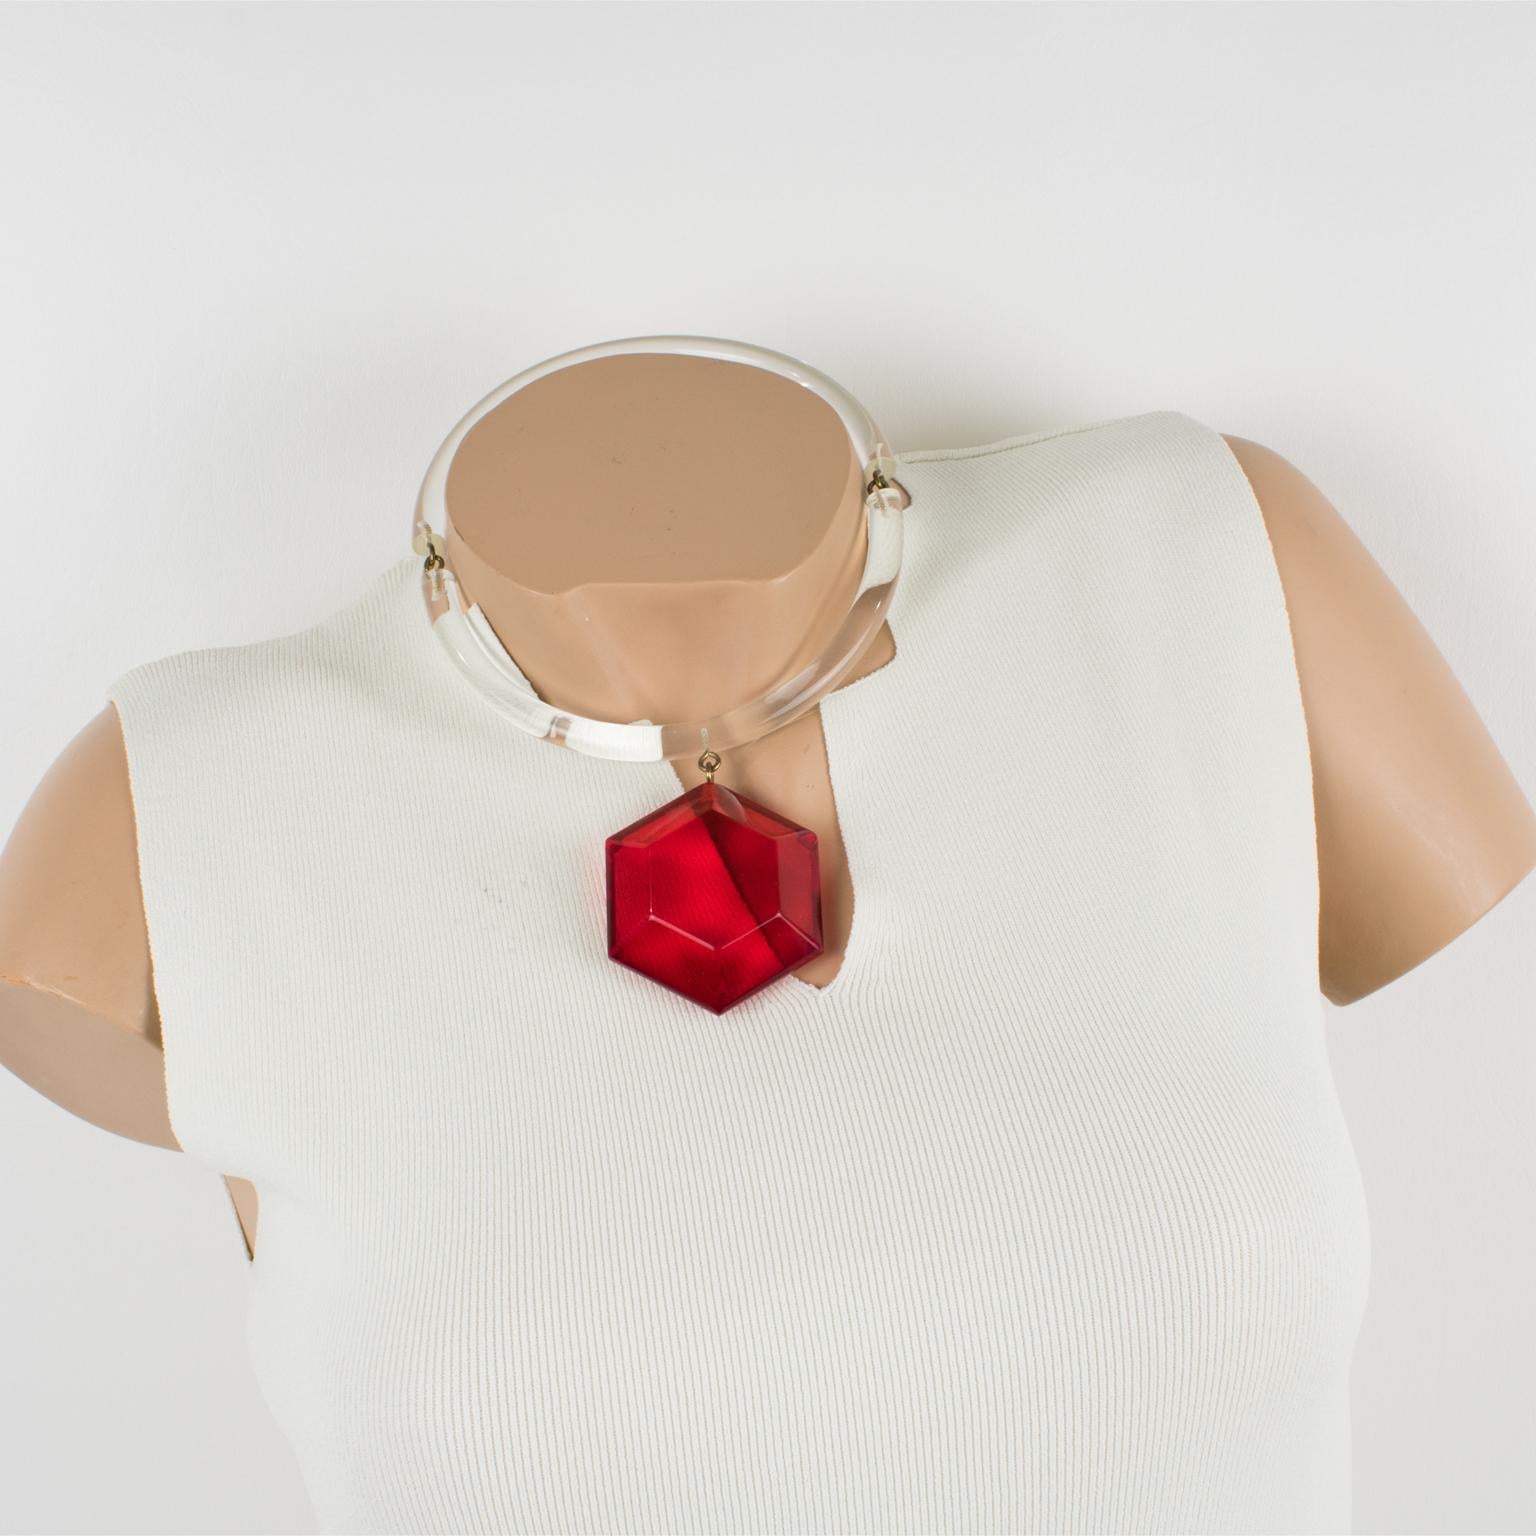 A fabulous piece of art by Judith Hendler. This necklace is from the 1980s. It has the iconic clear acrylic - Lucite neck tube ring and is ornate with a dimensional geometric diamond-shaped pendant in transparent bright red color.
Measurements: